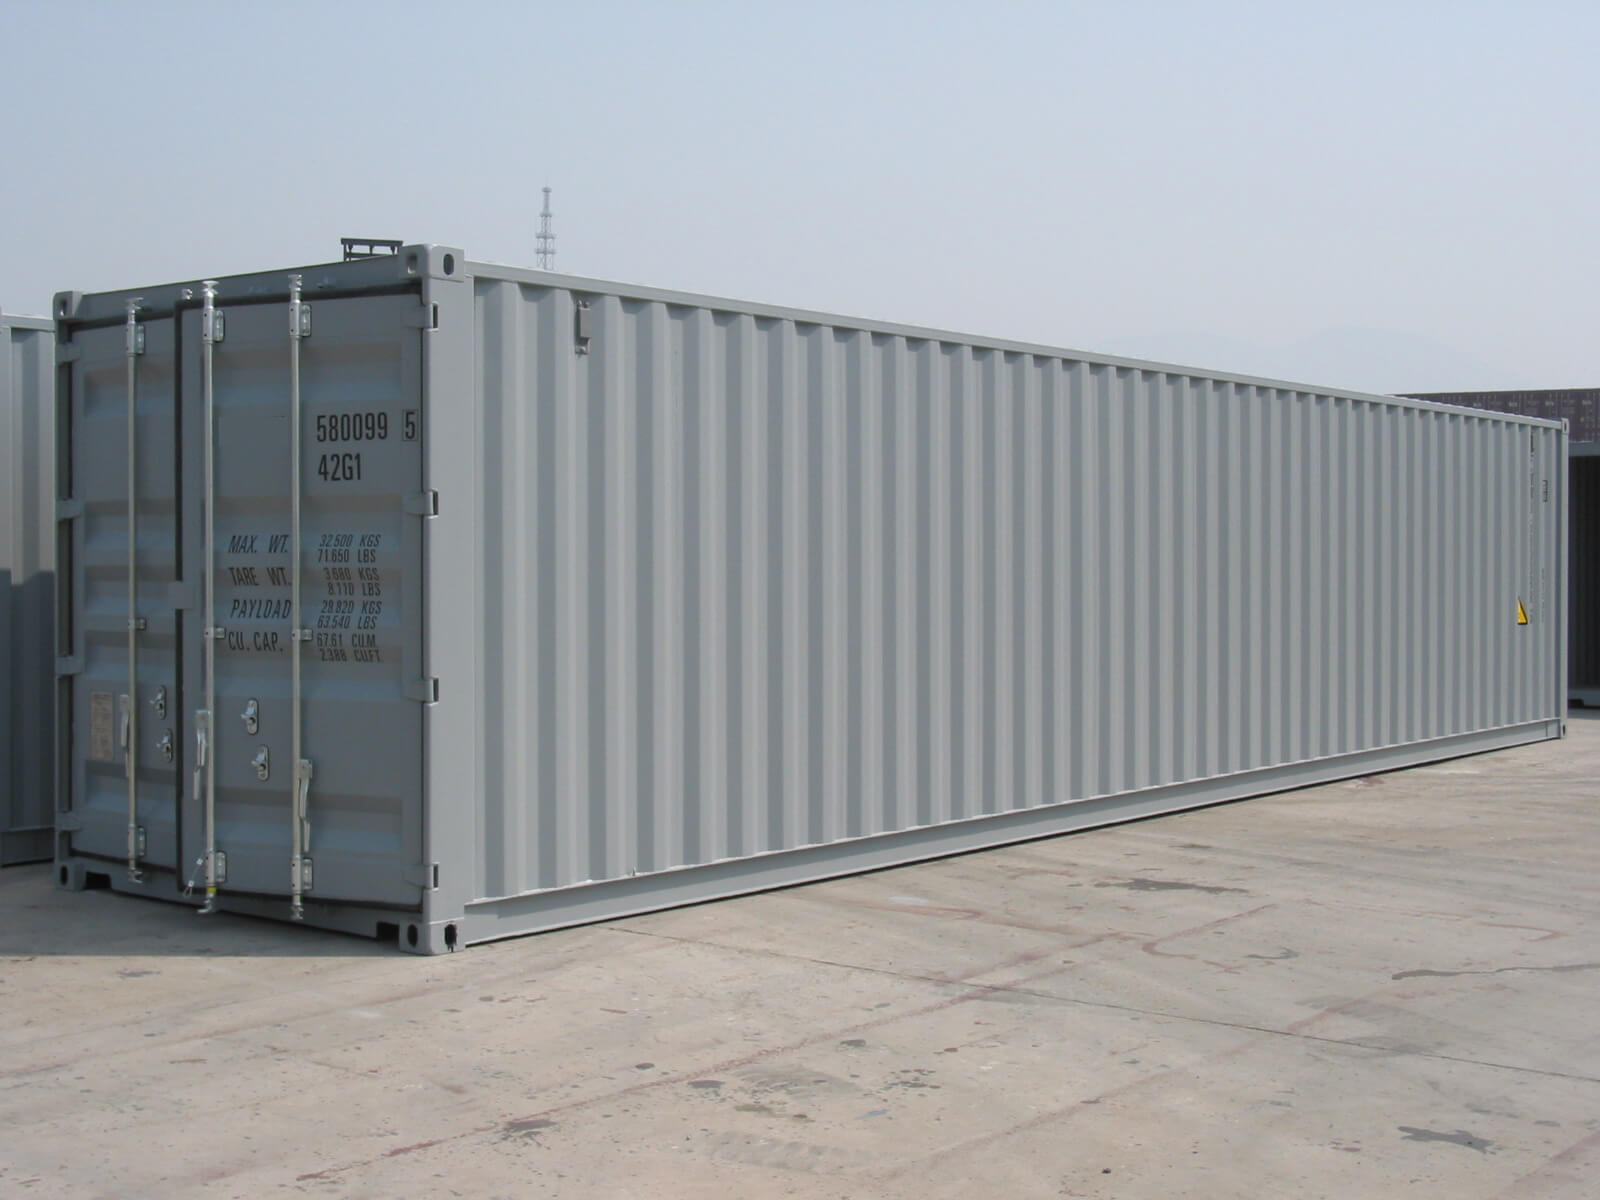 container offloaded from shipping vessel meaning